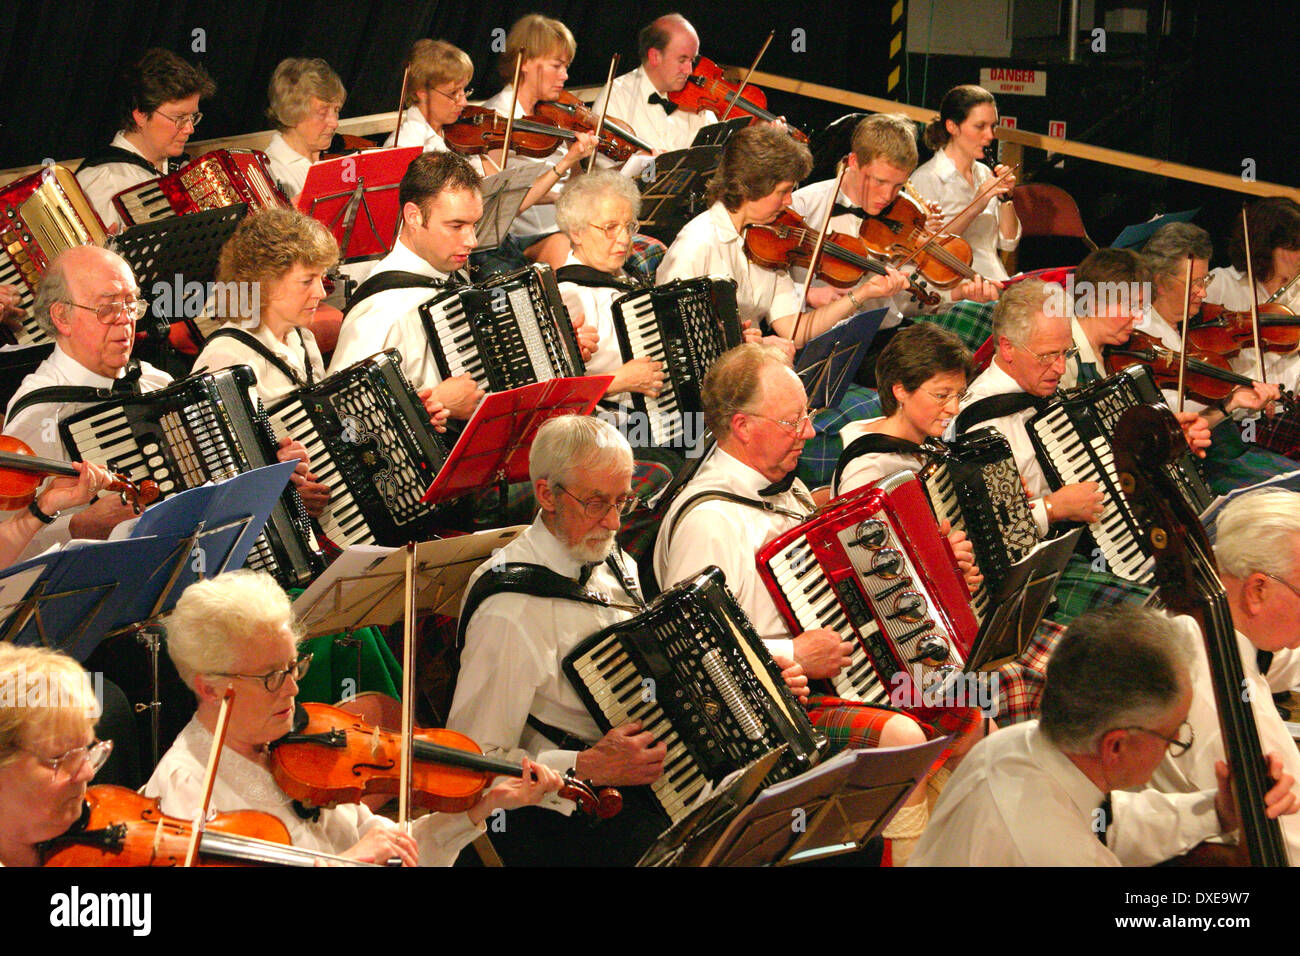 Accordian players at the fiddlers rally, Scotland. Stock Photo